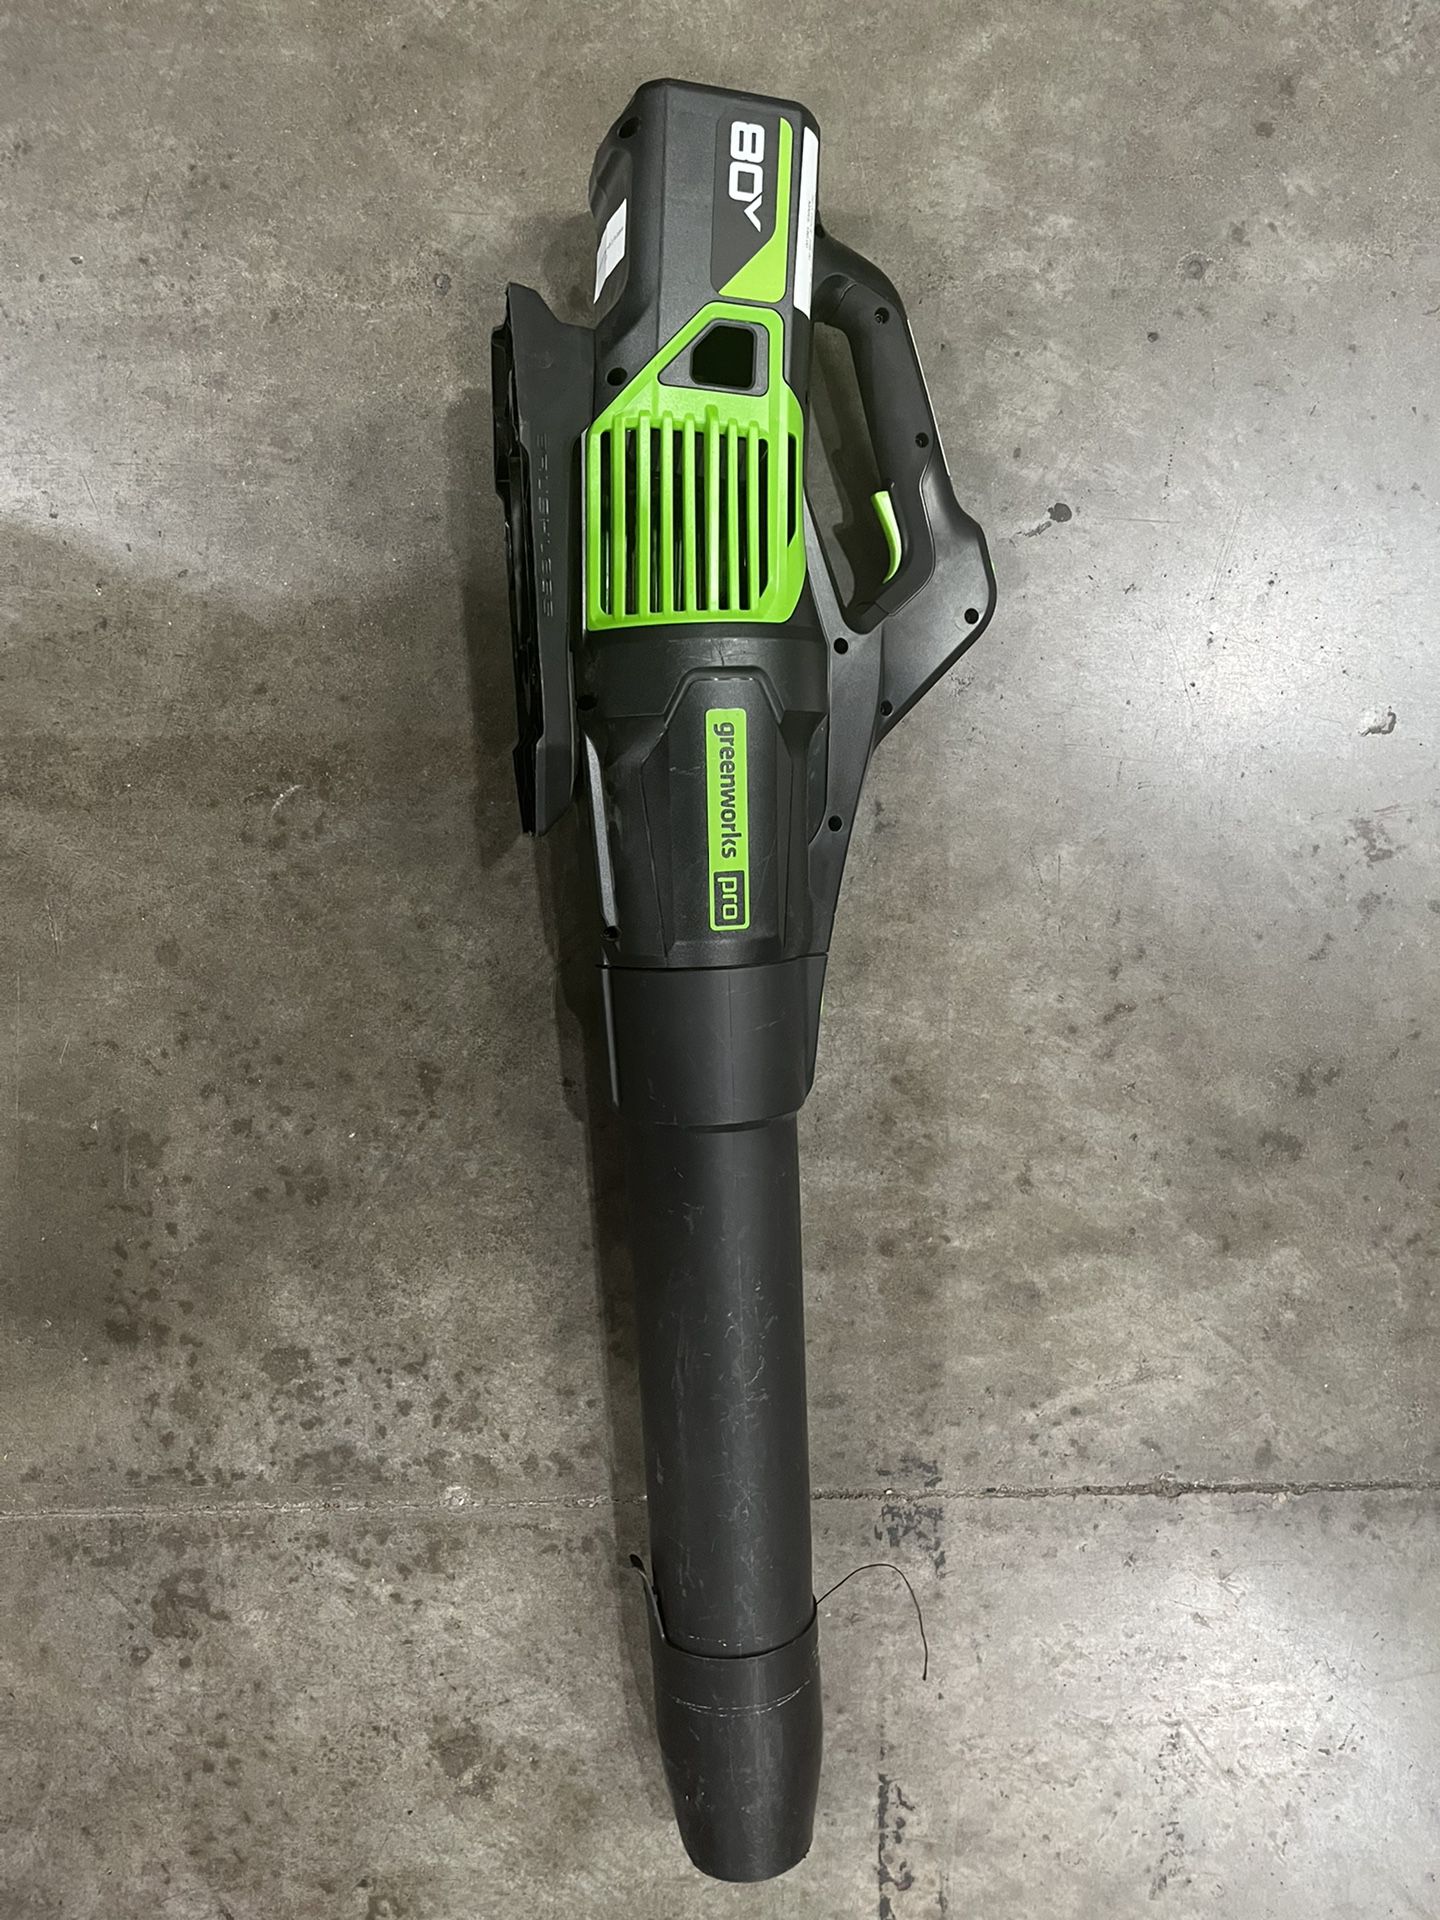 Out Of Box Green Works Leaf Blower